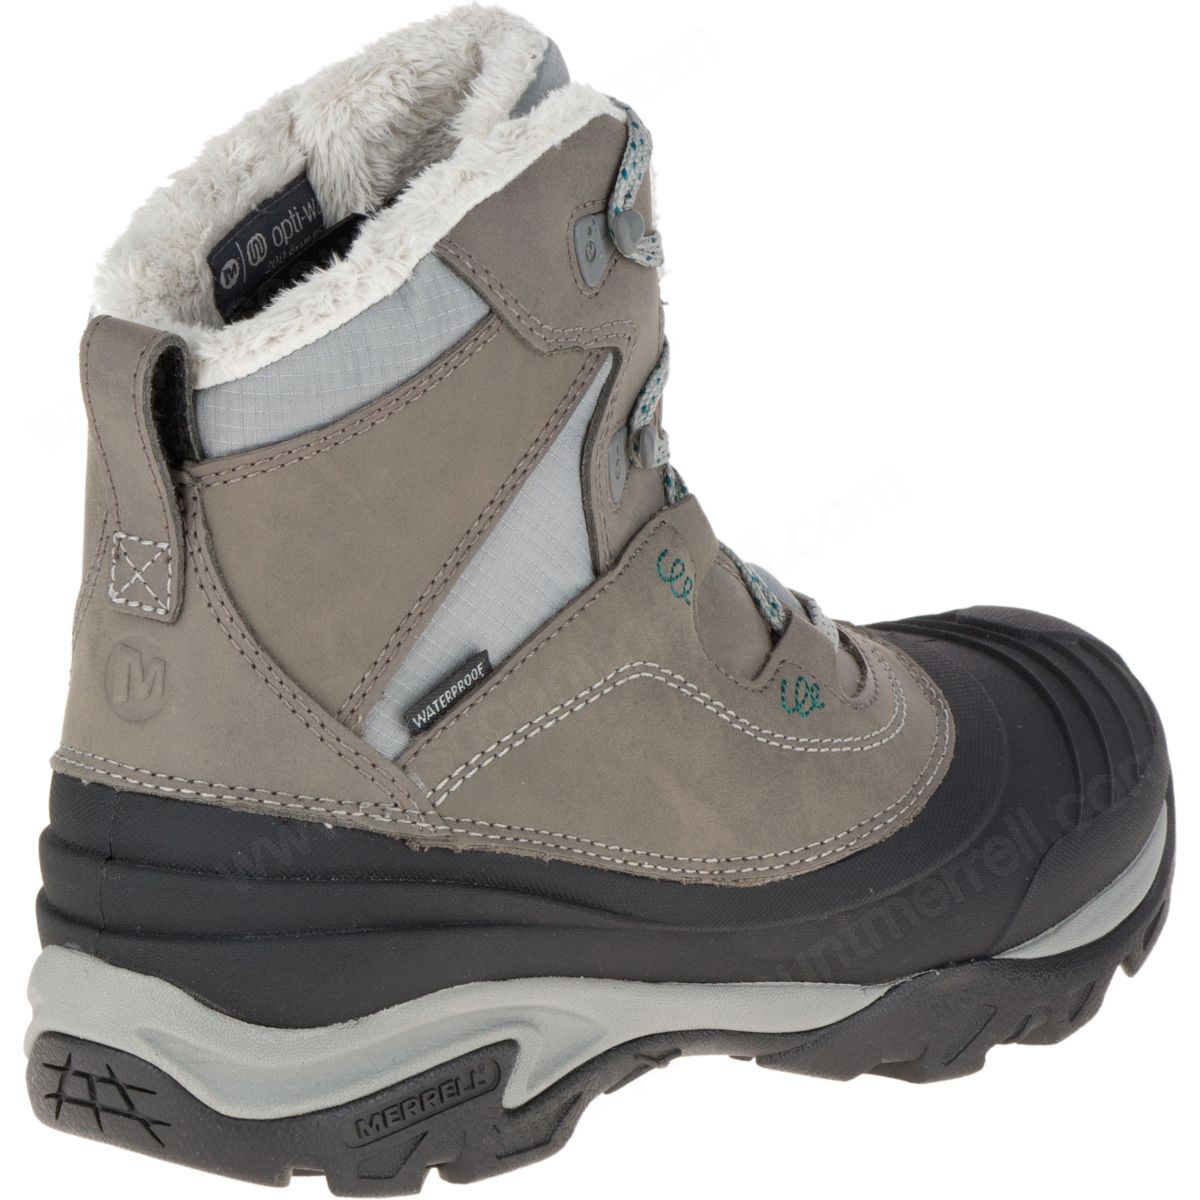 Merrell Lady's Snowbound Mid Waterproof Charcoal - -7